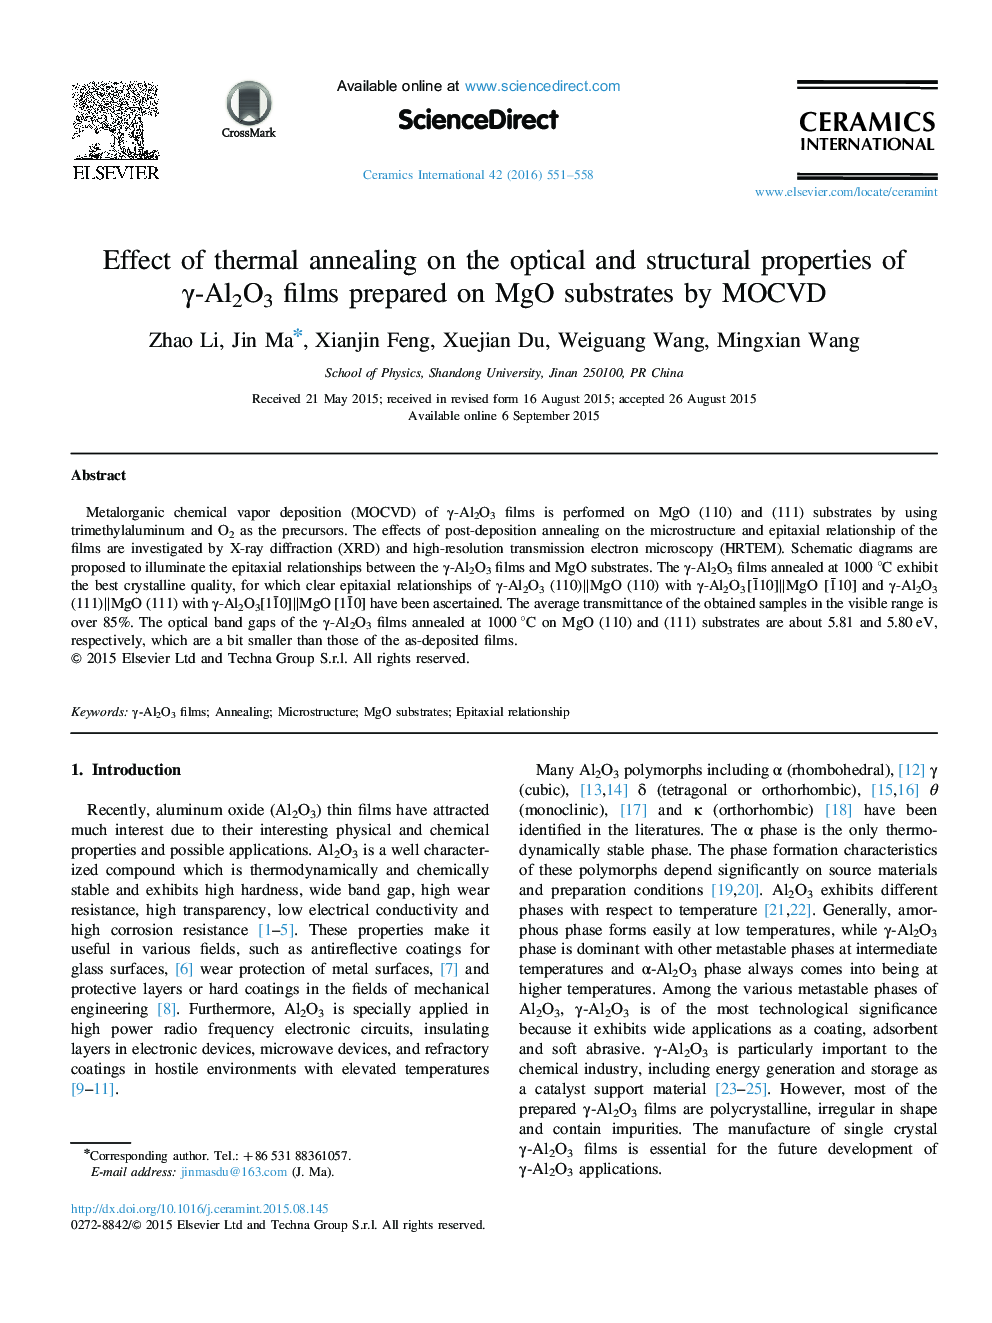 Effect of thermal annealing on the optical and structural properties of γ-Al2O3 films prepared on MgO substrates by MOCVD